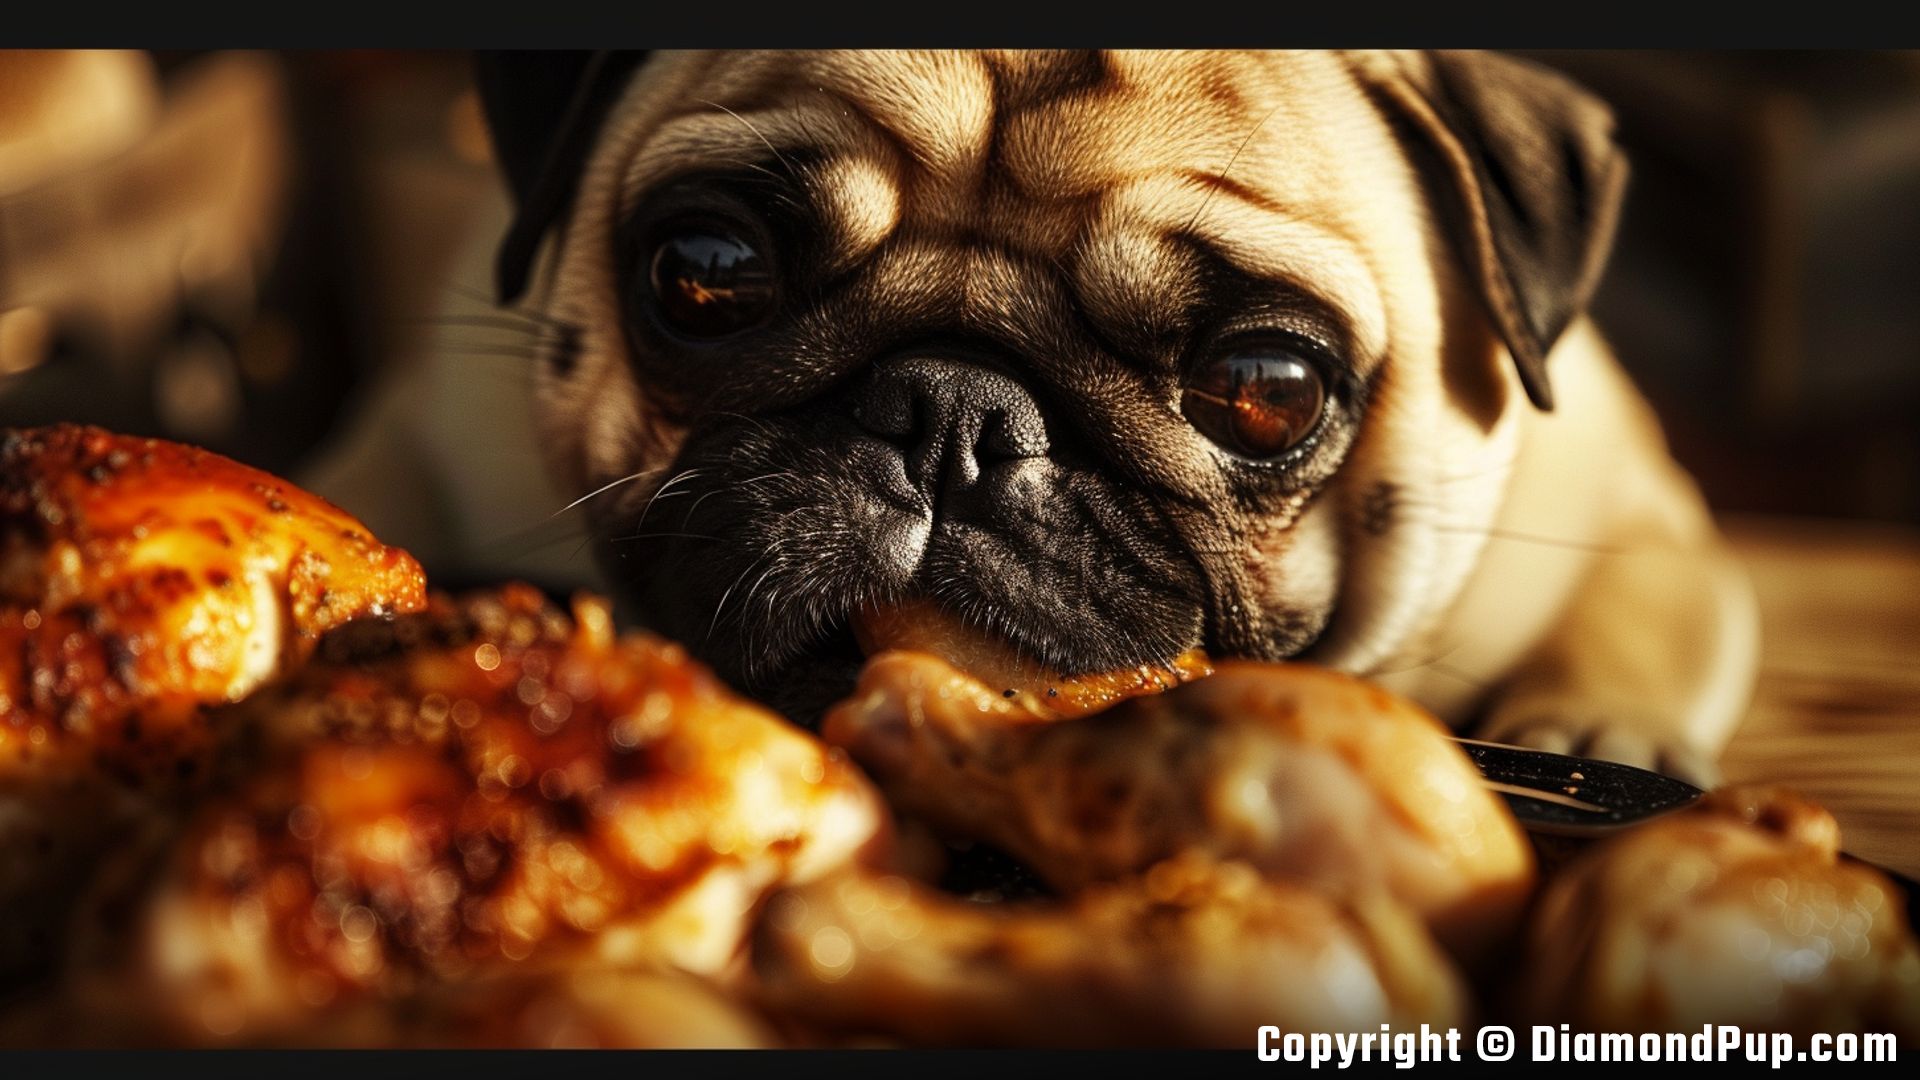 Photograph of a Playful Pug Snacking on Chicken